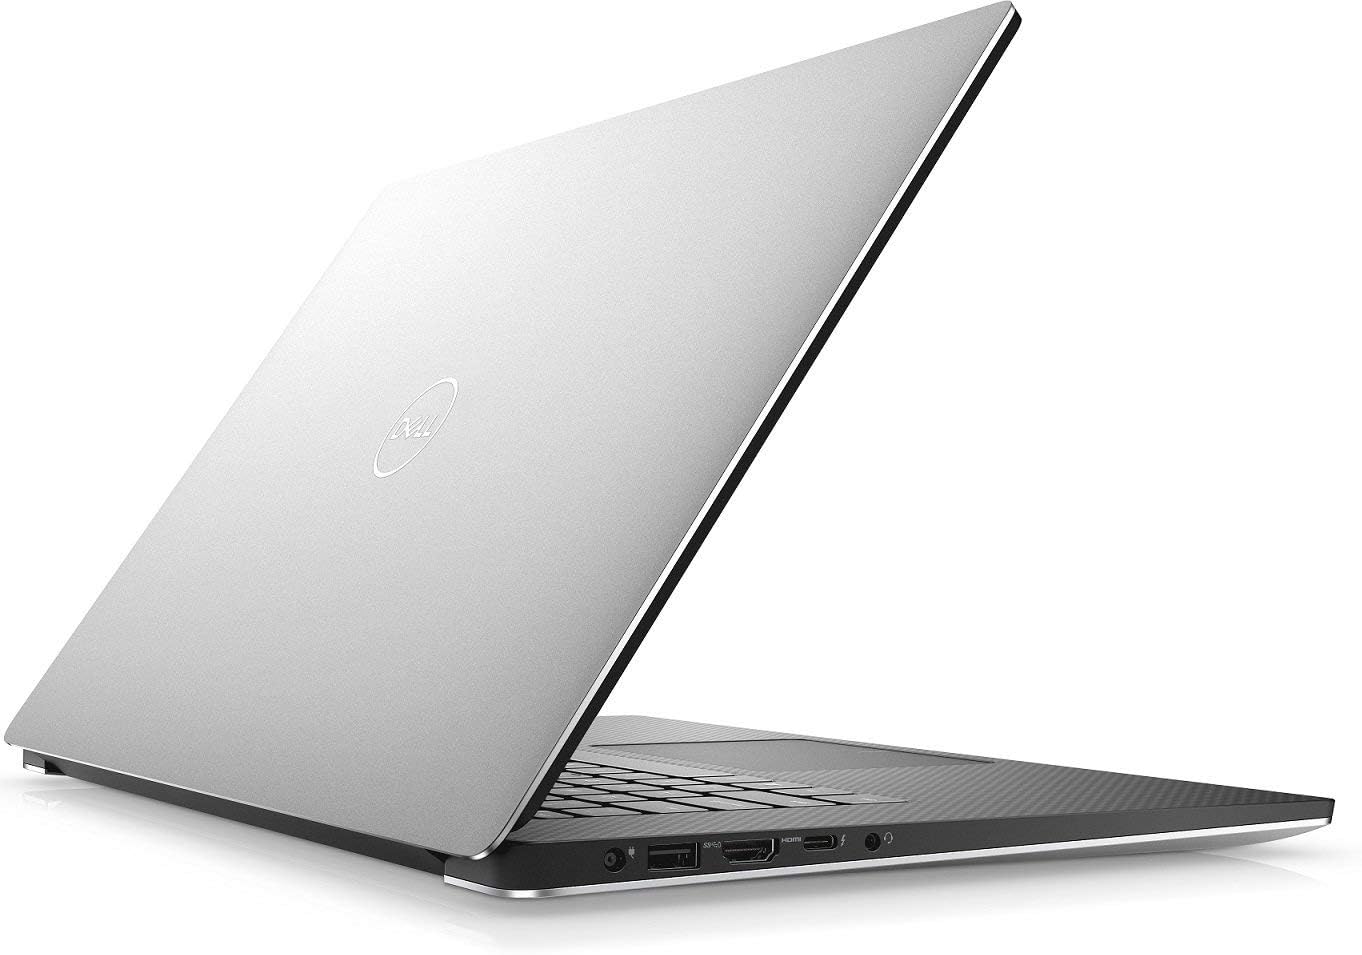 Dell XPS 15 9570 Home and Business Laptop (Intel i7-8750H 6-Core, 16GB RAM, 512GB SSD, 15.6" Touch 4K UHD (3840x2160), 4GB NVIDIA GTX 1050 Ti